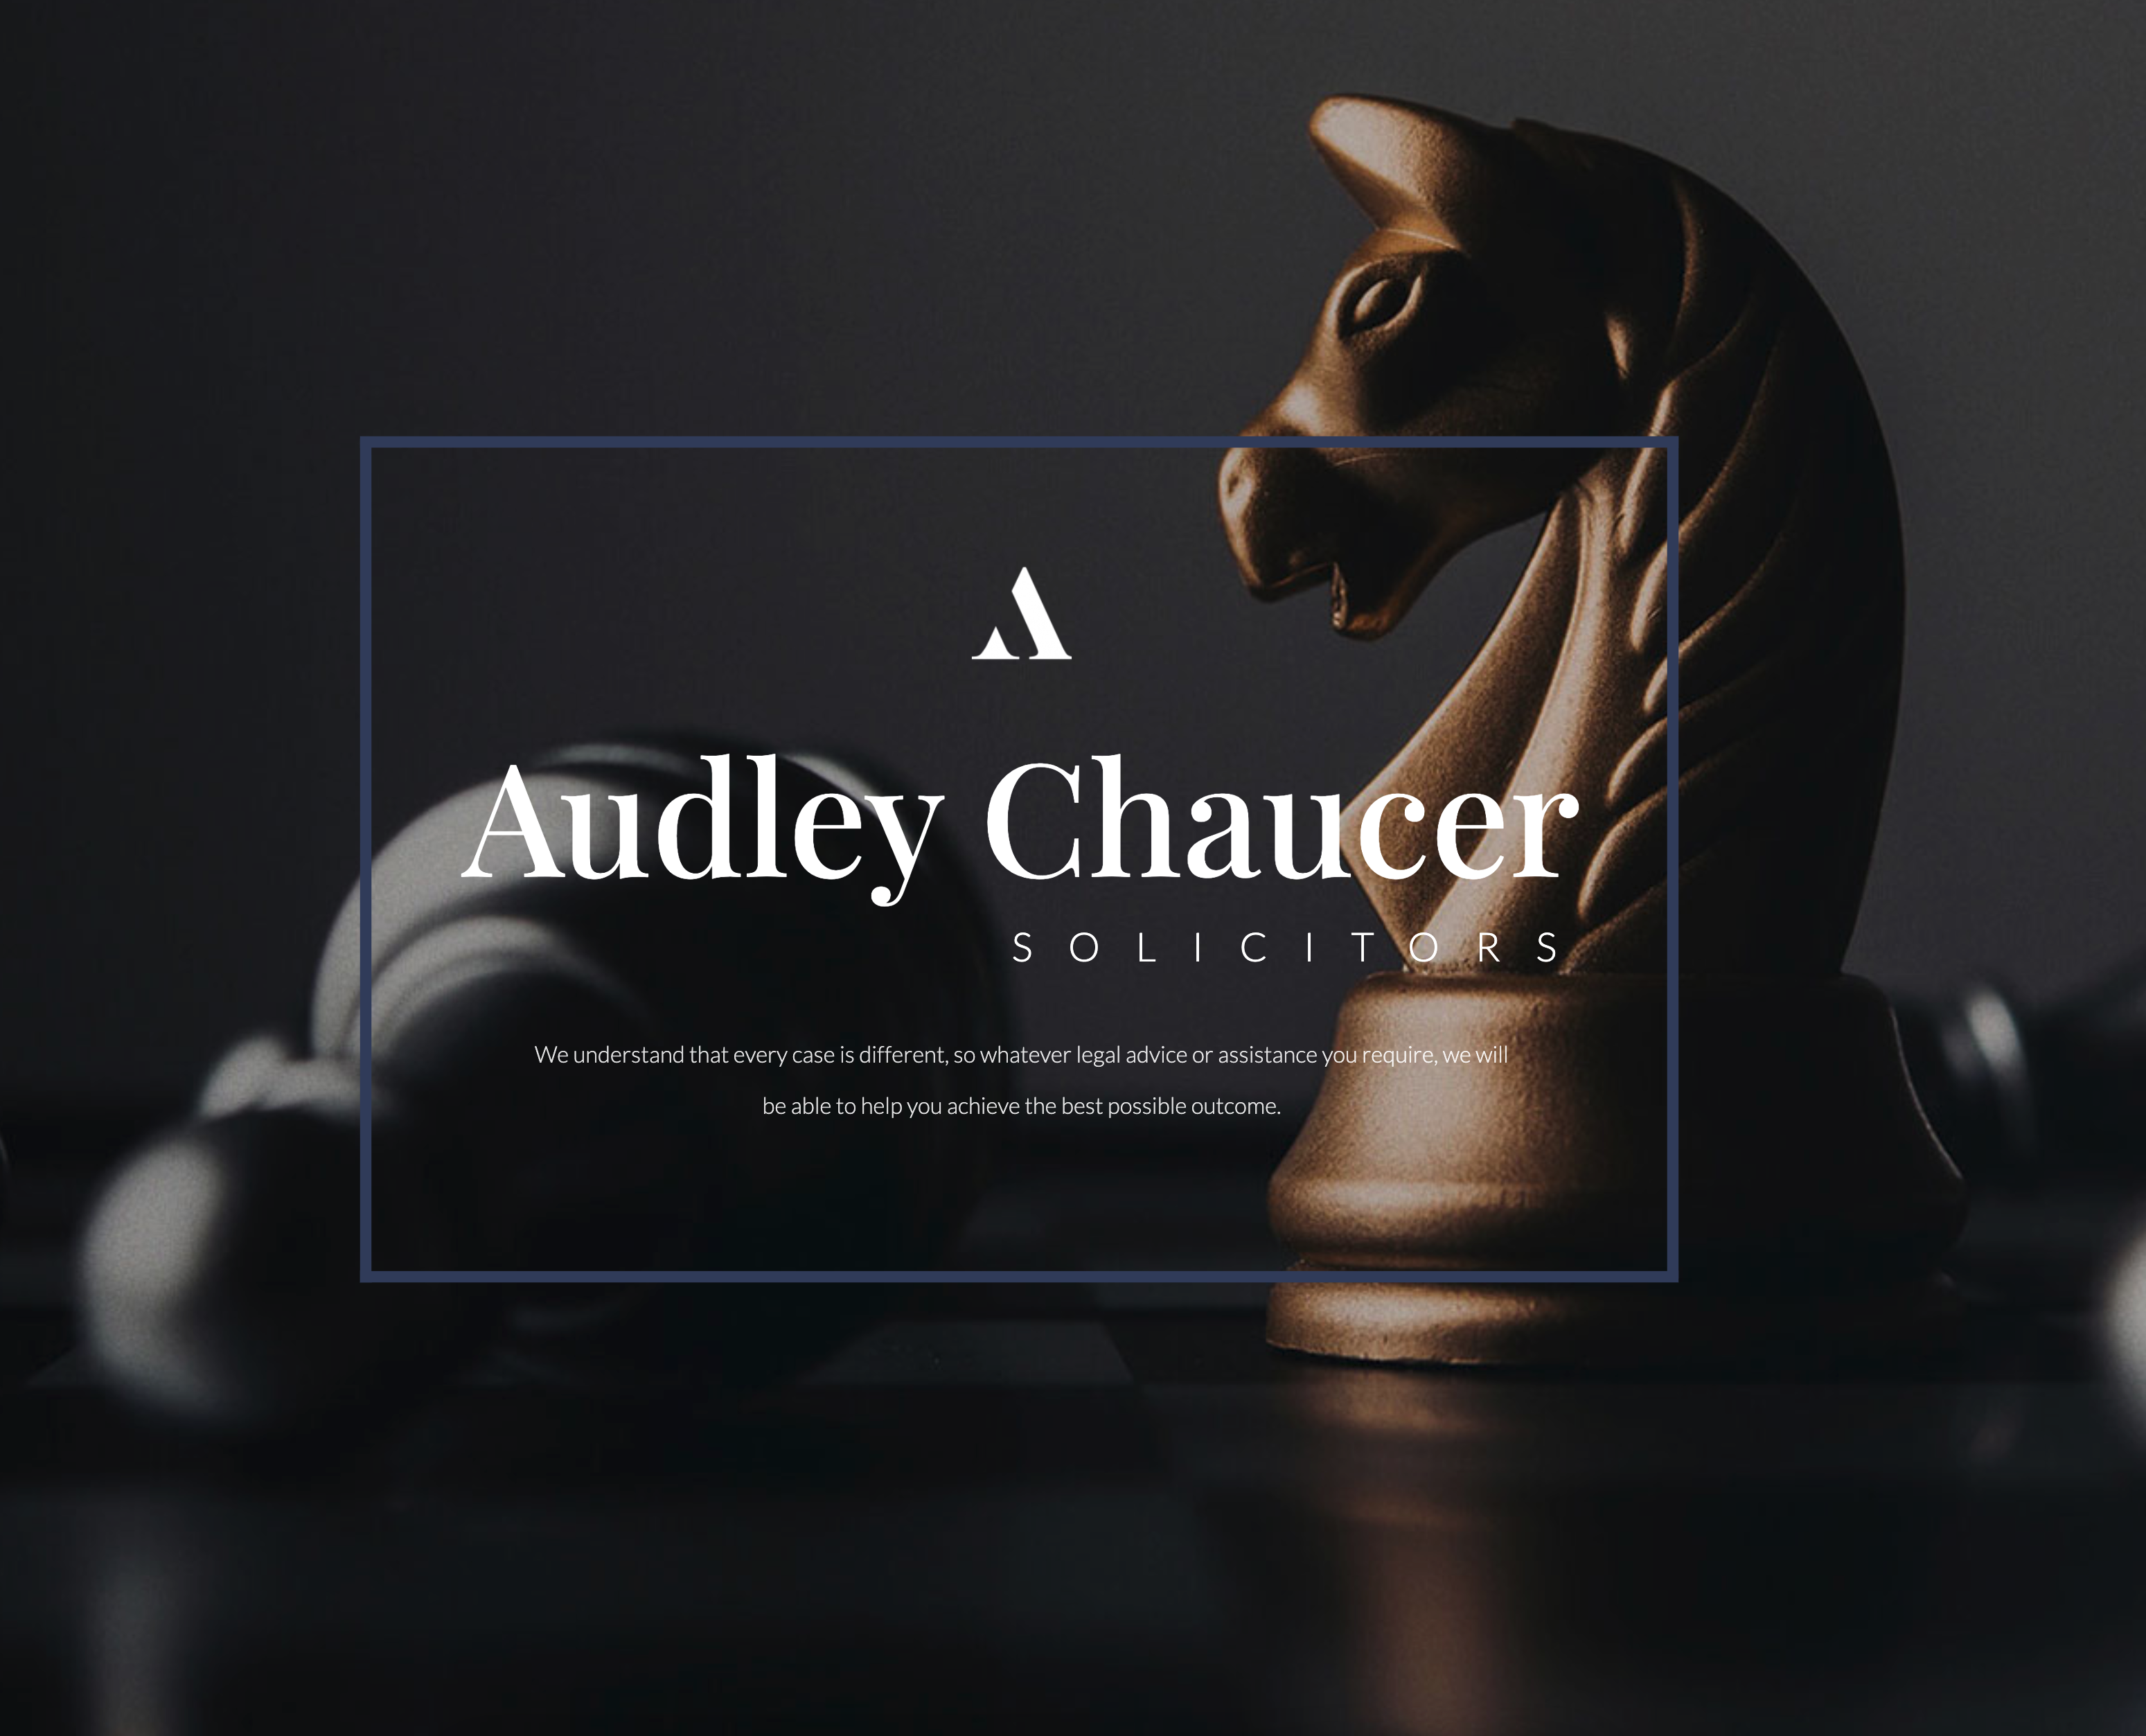 Audley Chaucer